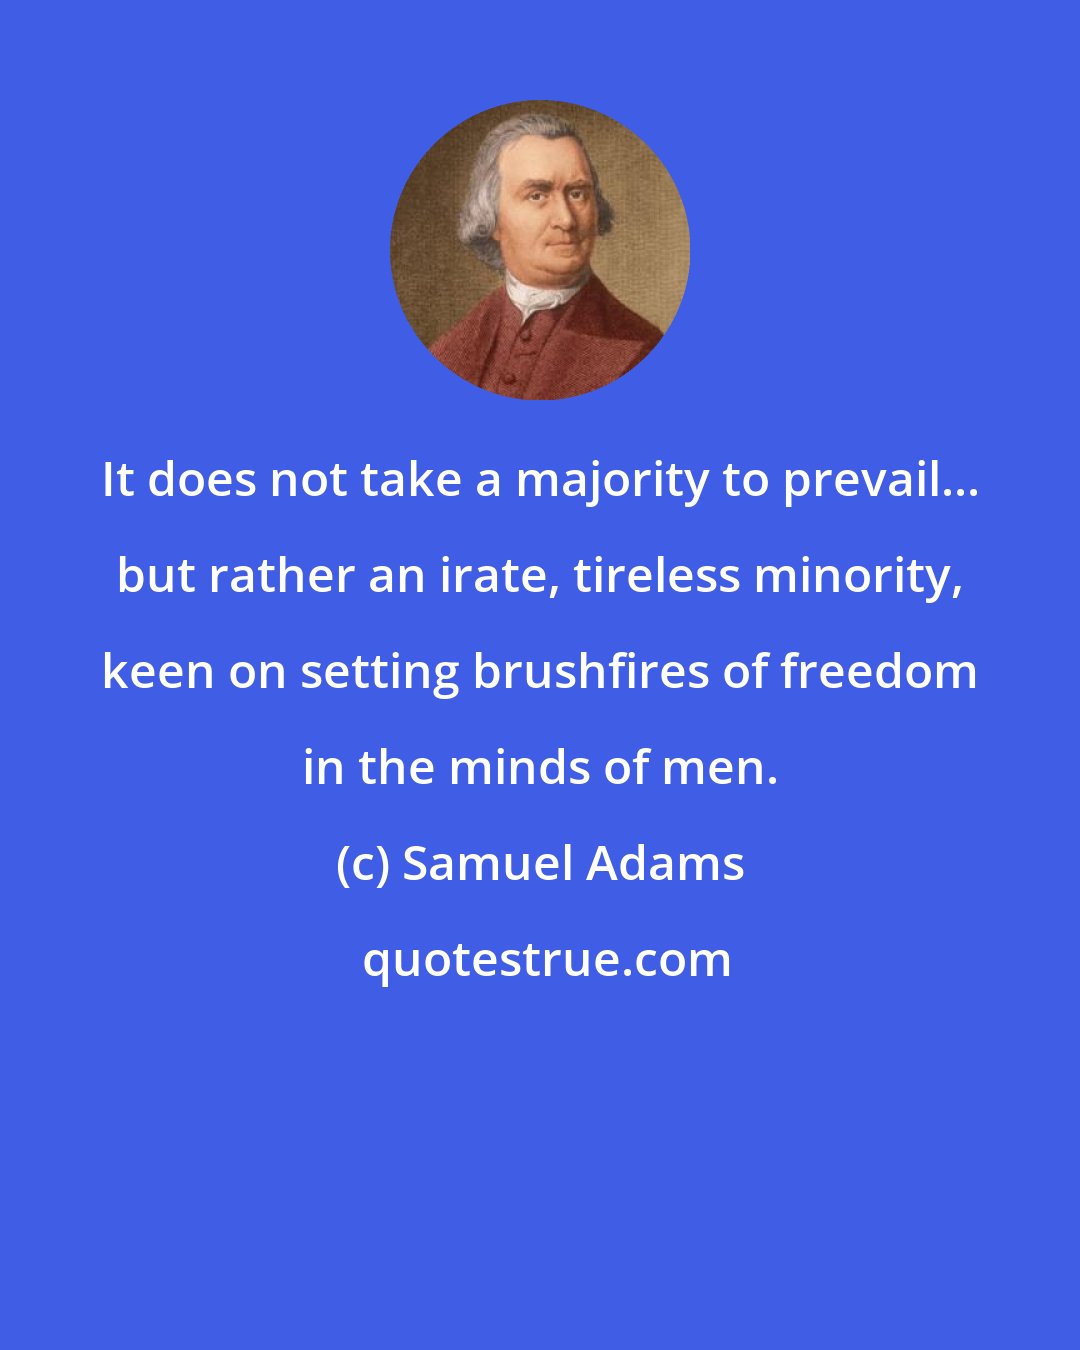 Samuel Adams: It does not take a majority to prevail... but rather an irate, tireless minority, keen on setting brushfires of freedom in the minds of men.